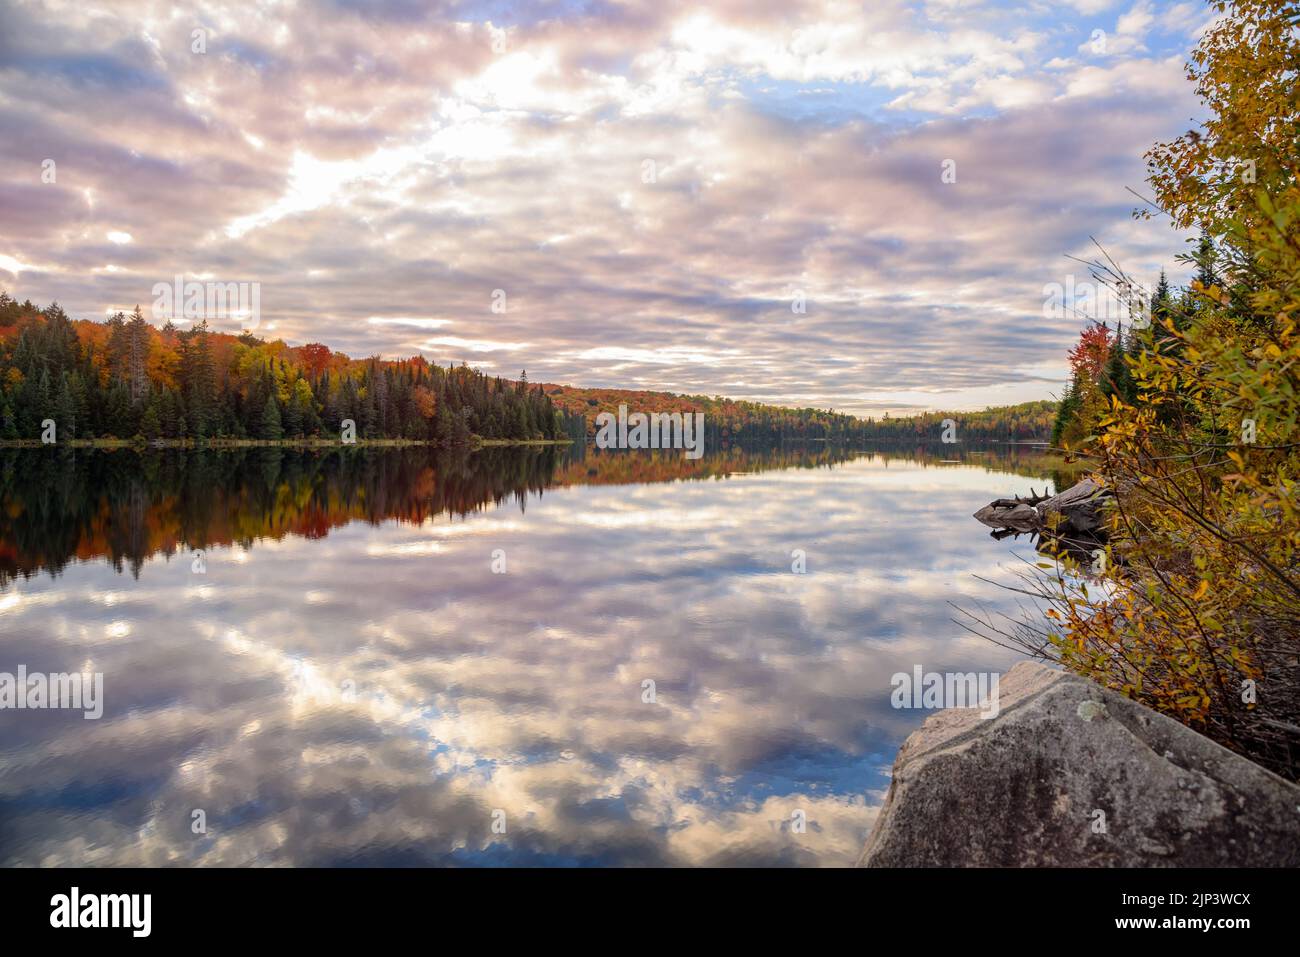 Beautiful lake with wooded shores at the peak of fall foliage under cloudy sky at sunset. Reflection in water. Algonquin Park, On, Canada. Stock Photo